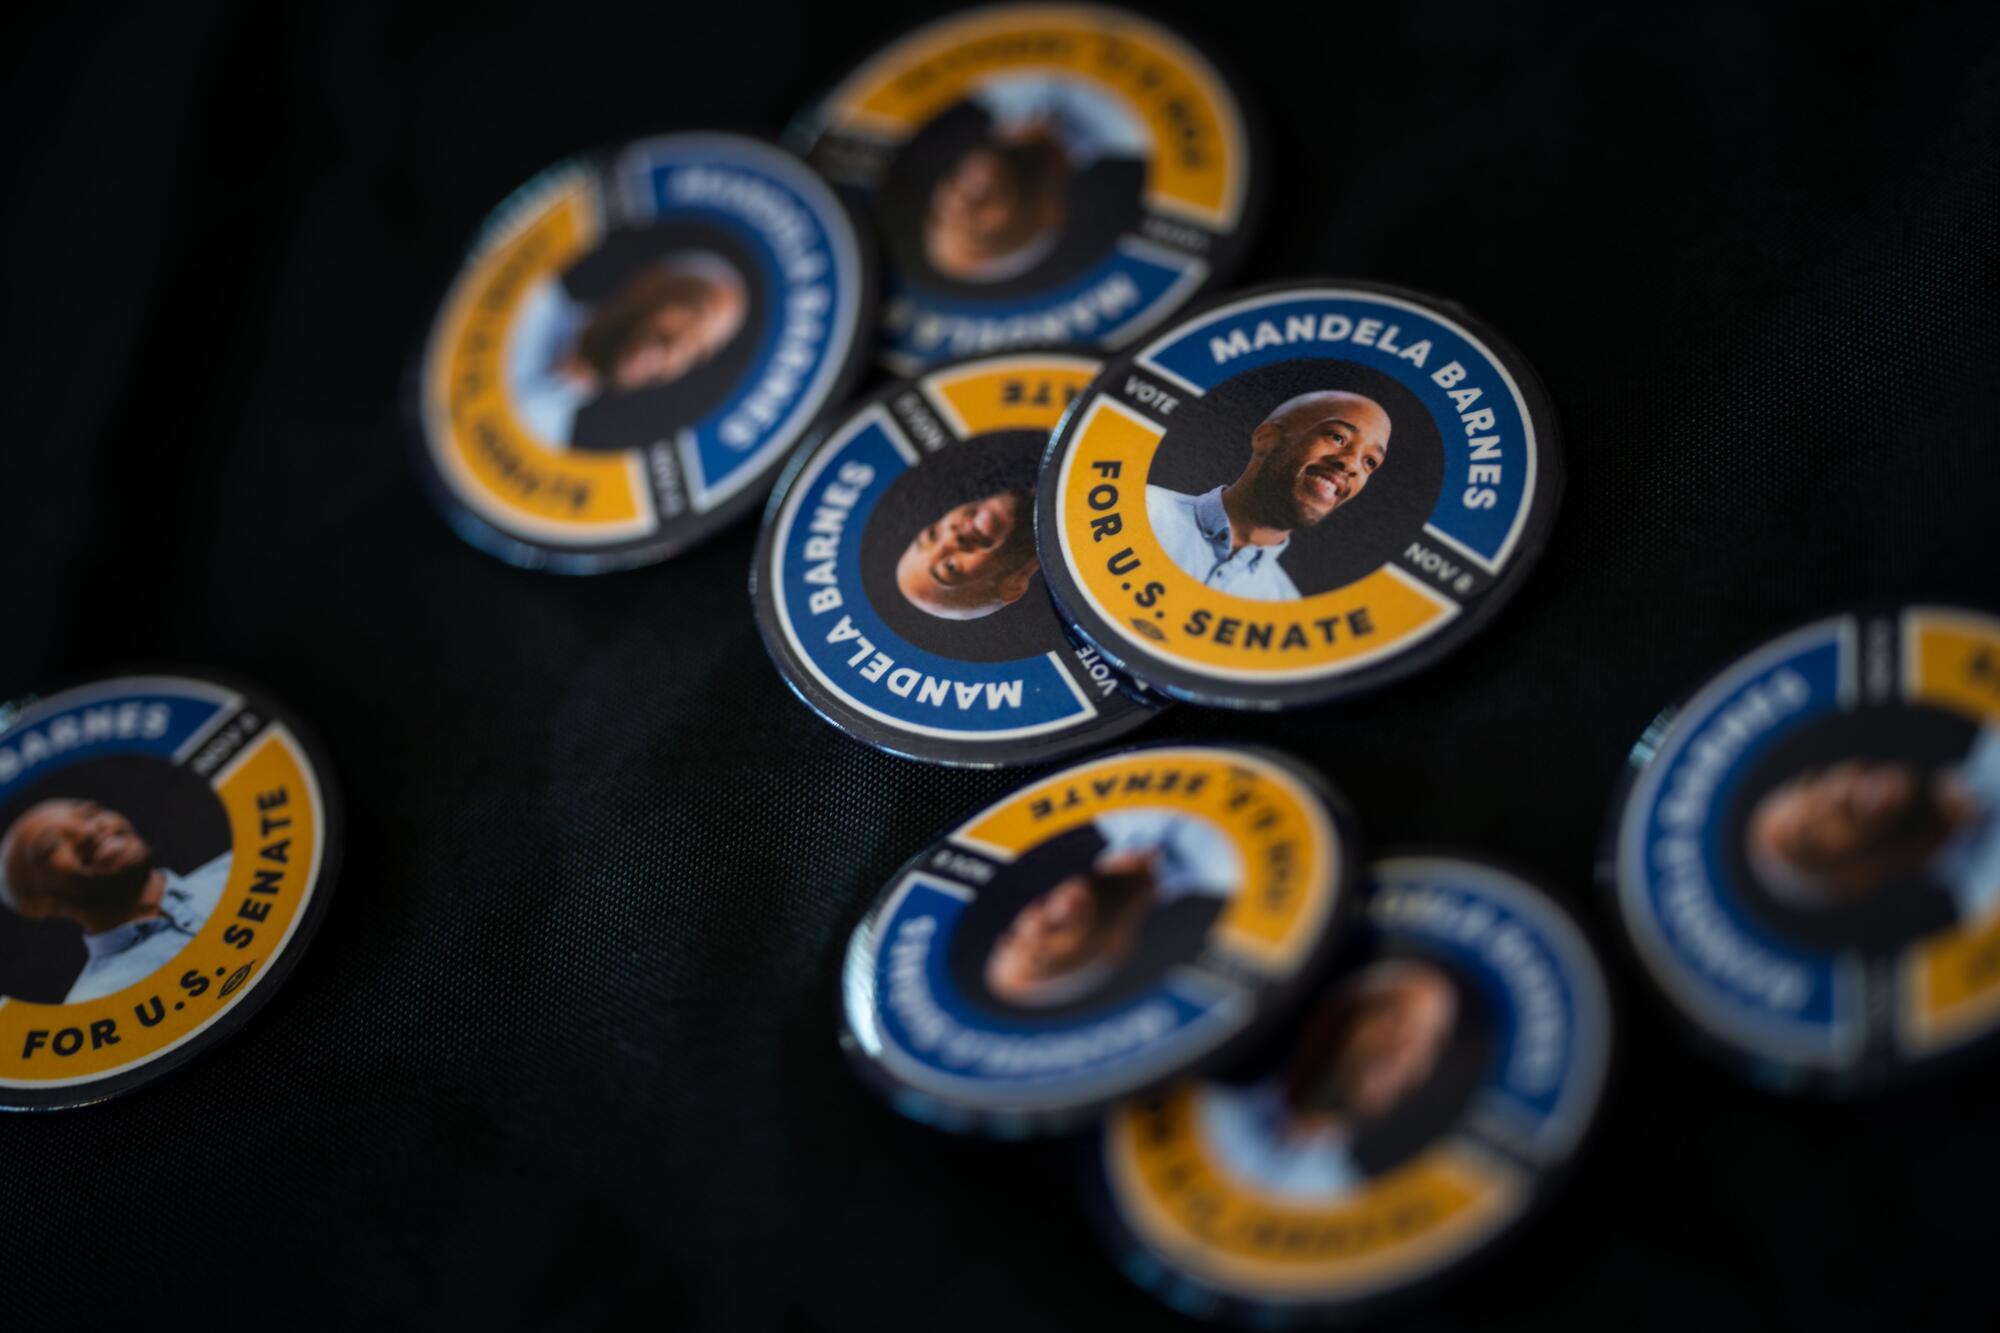 Campaign buttons are seen on a table as Democratic candidate for U.S. Senate Mandela Barnes